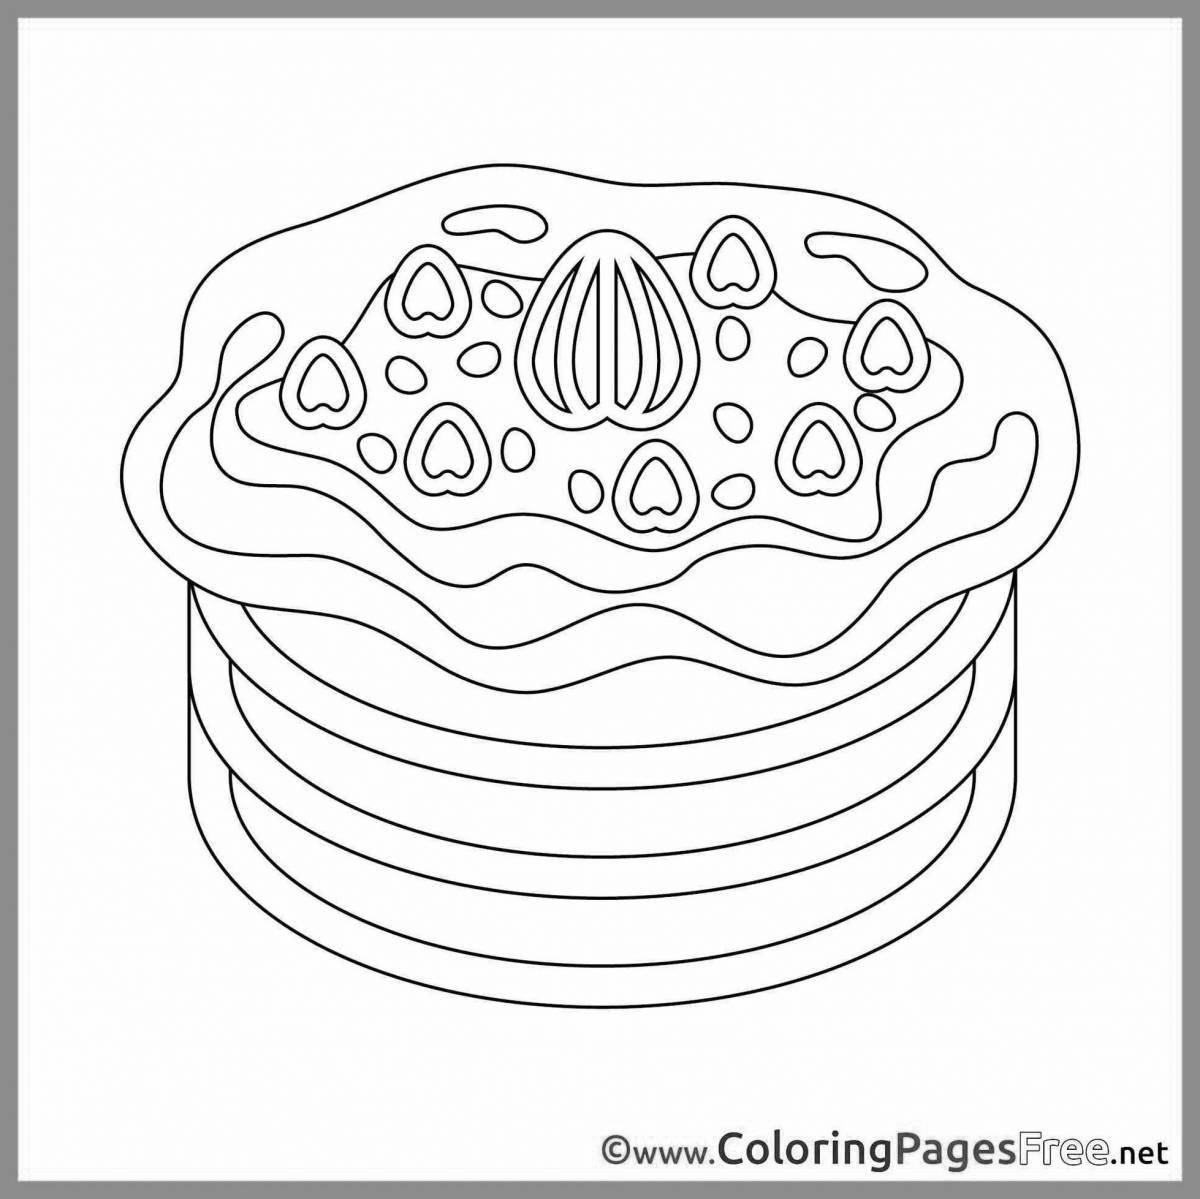 Fantastic pancake coloring pages for kids